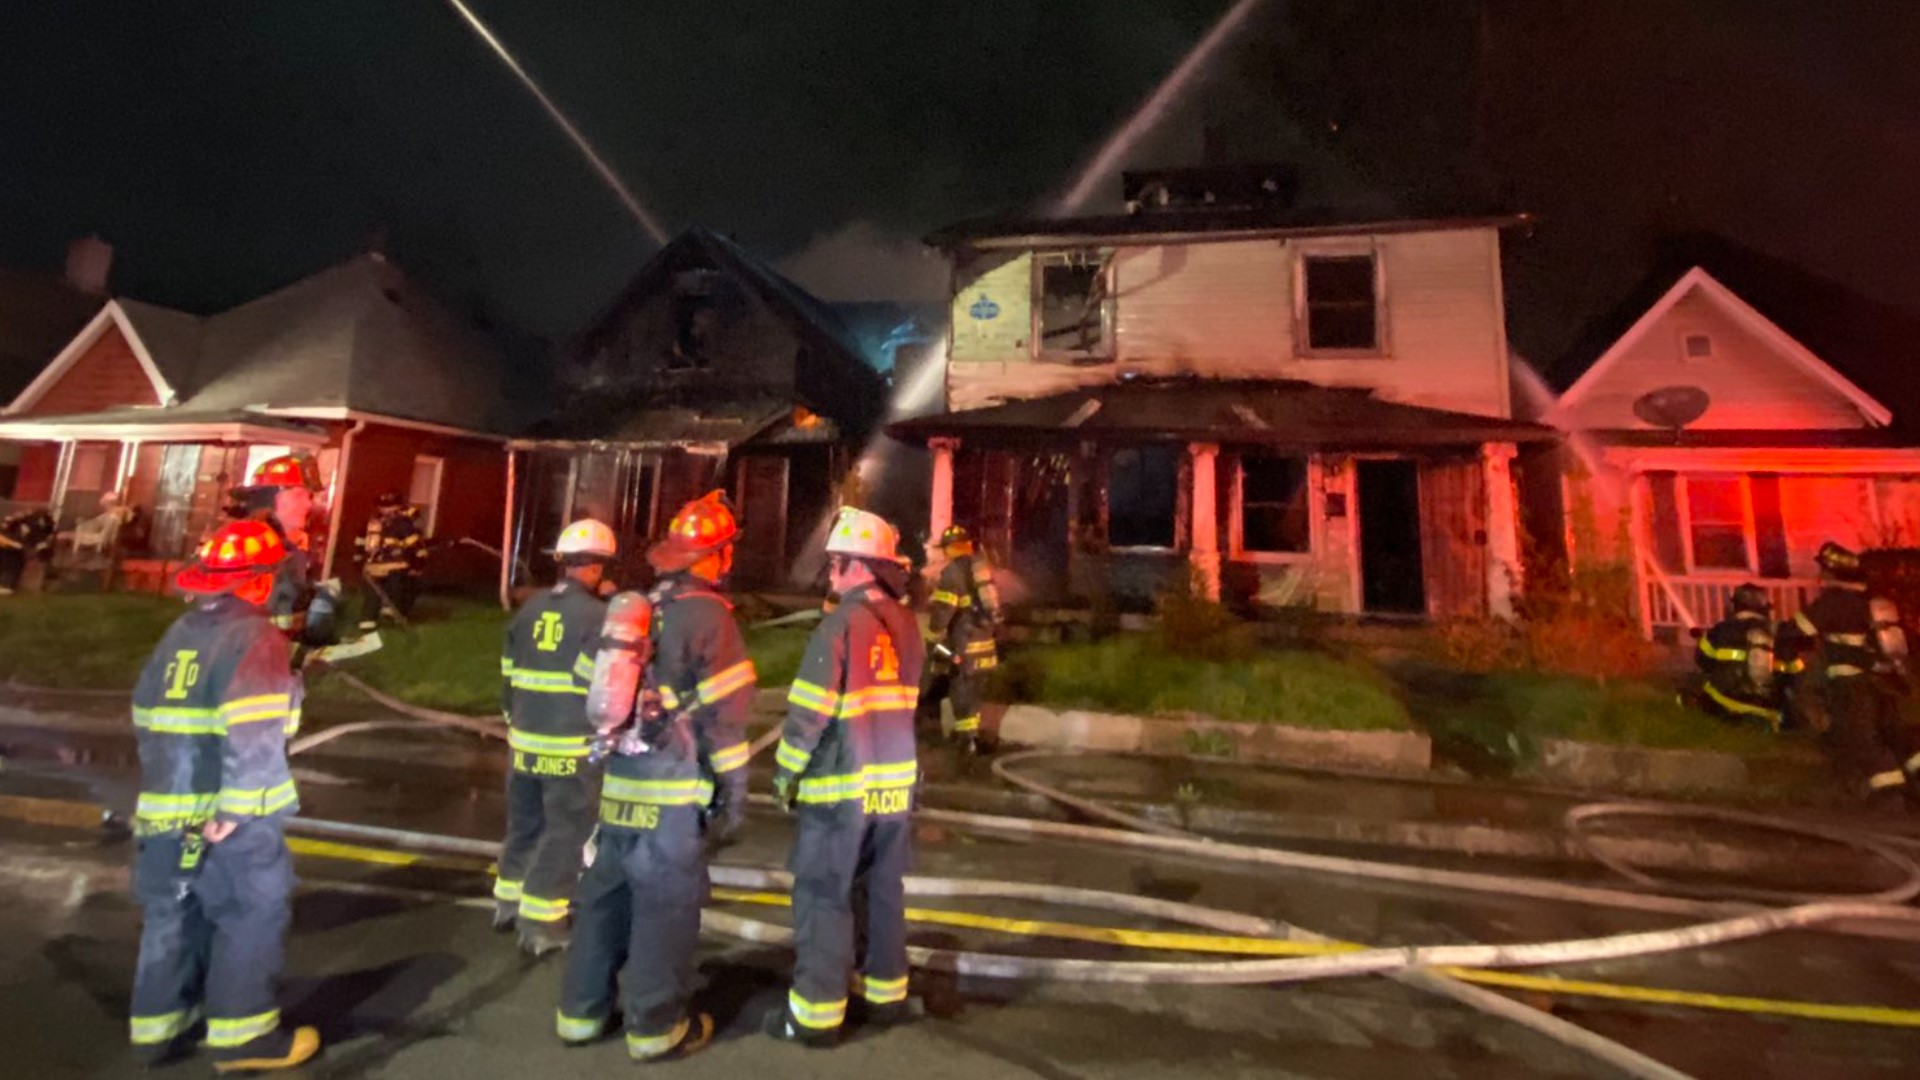 The fire started shortly before 5 a.m. in the 1200 block of West 29th Street, near Dr. Martin Luther King Jr. Street.